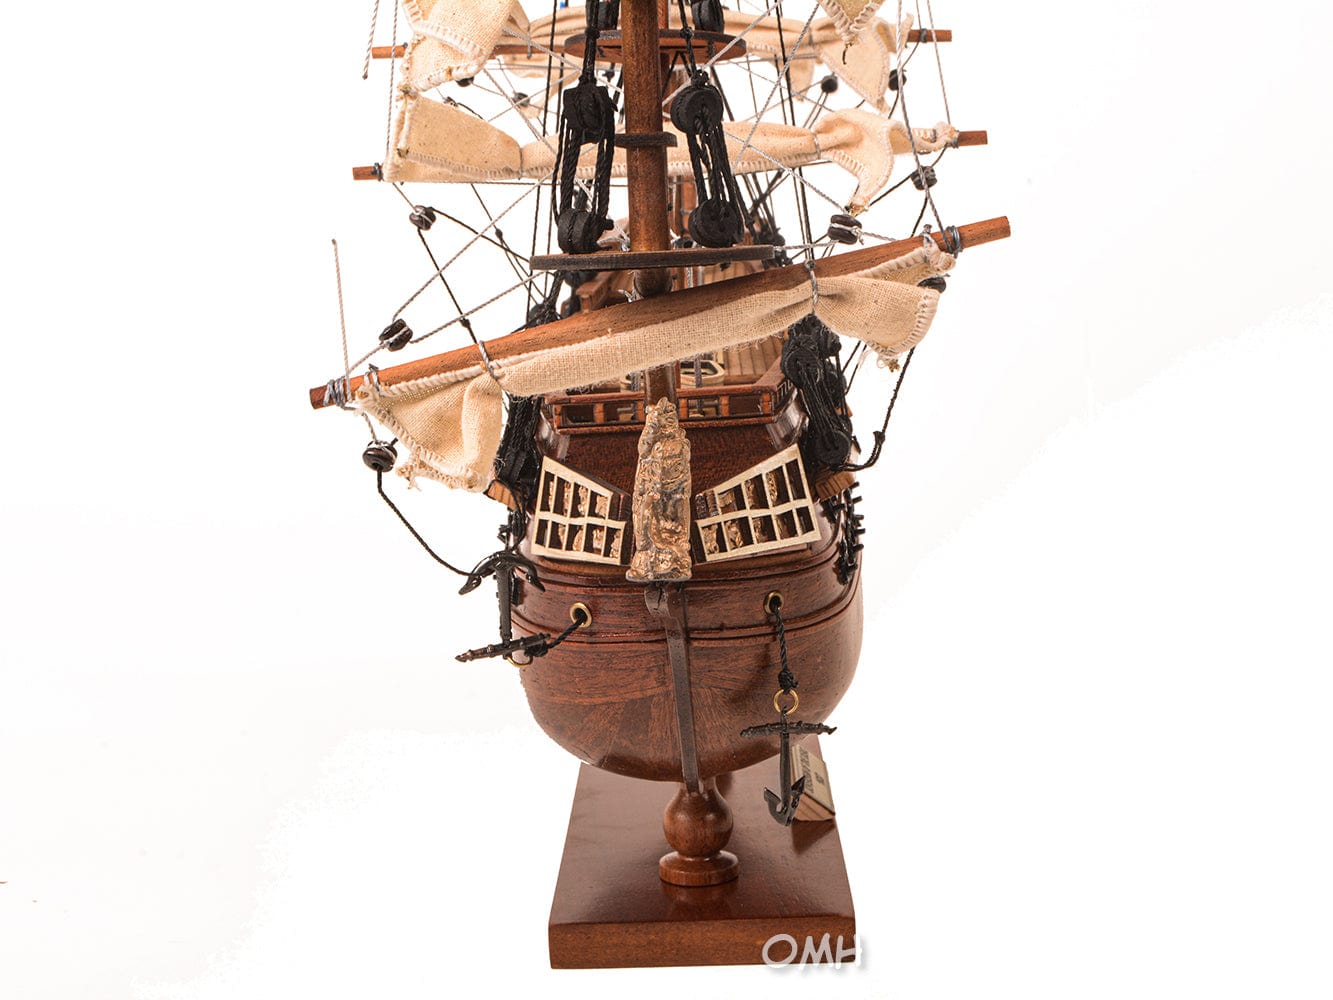 Aldo Hobbies & Creative Arts> Collectibles> Scale Model HMS Sovereign Of The Seas Tall Ship Small  Wood Model Sailboat Assembled